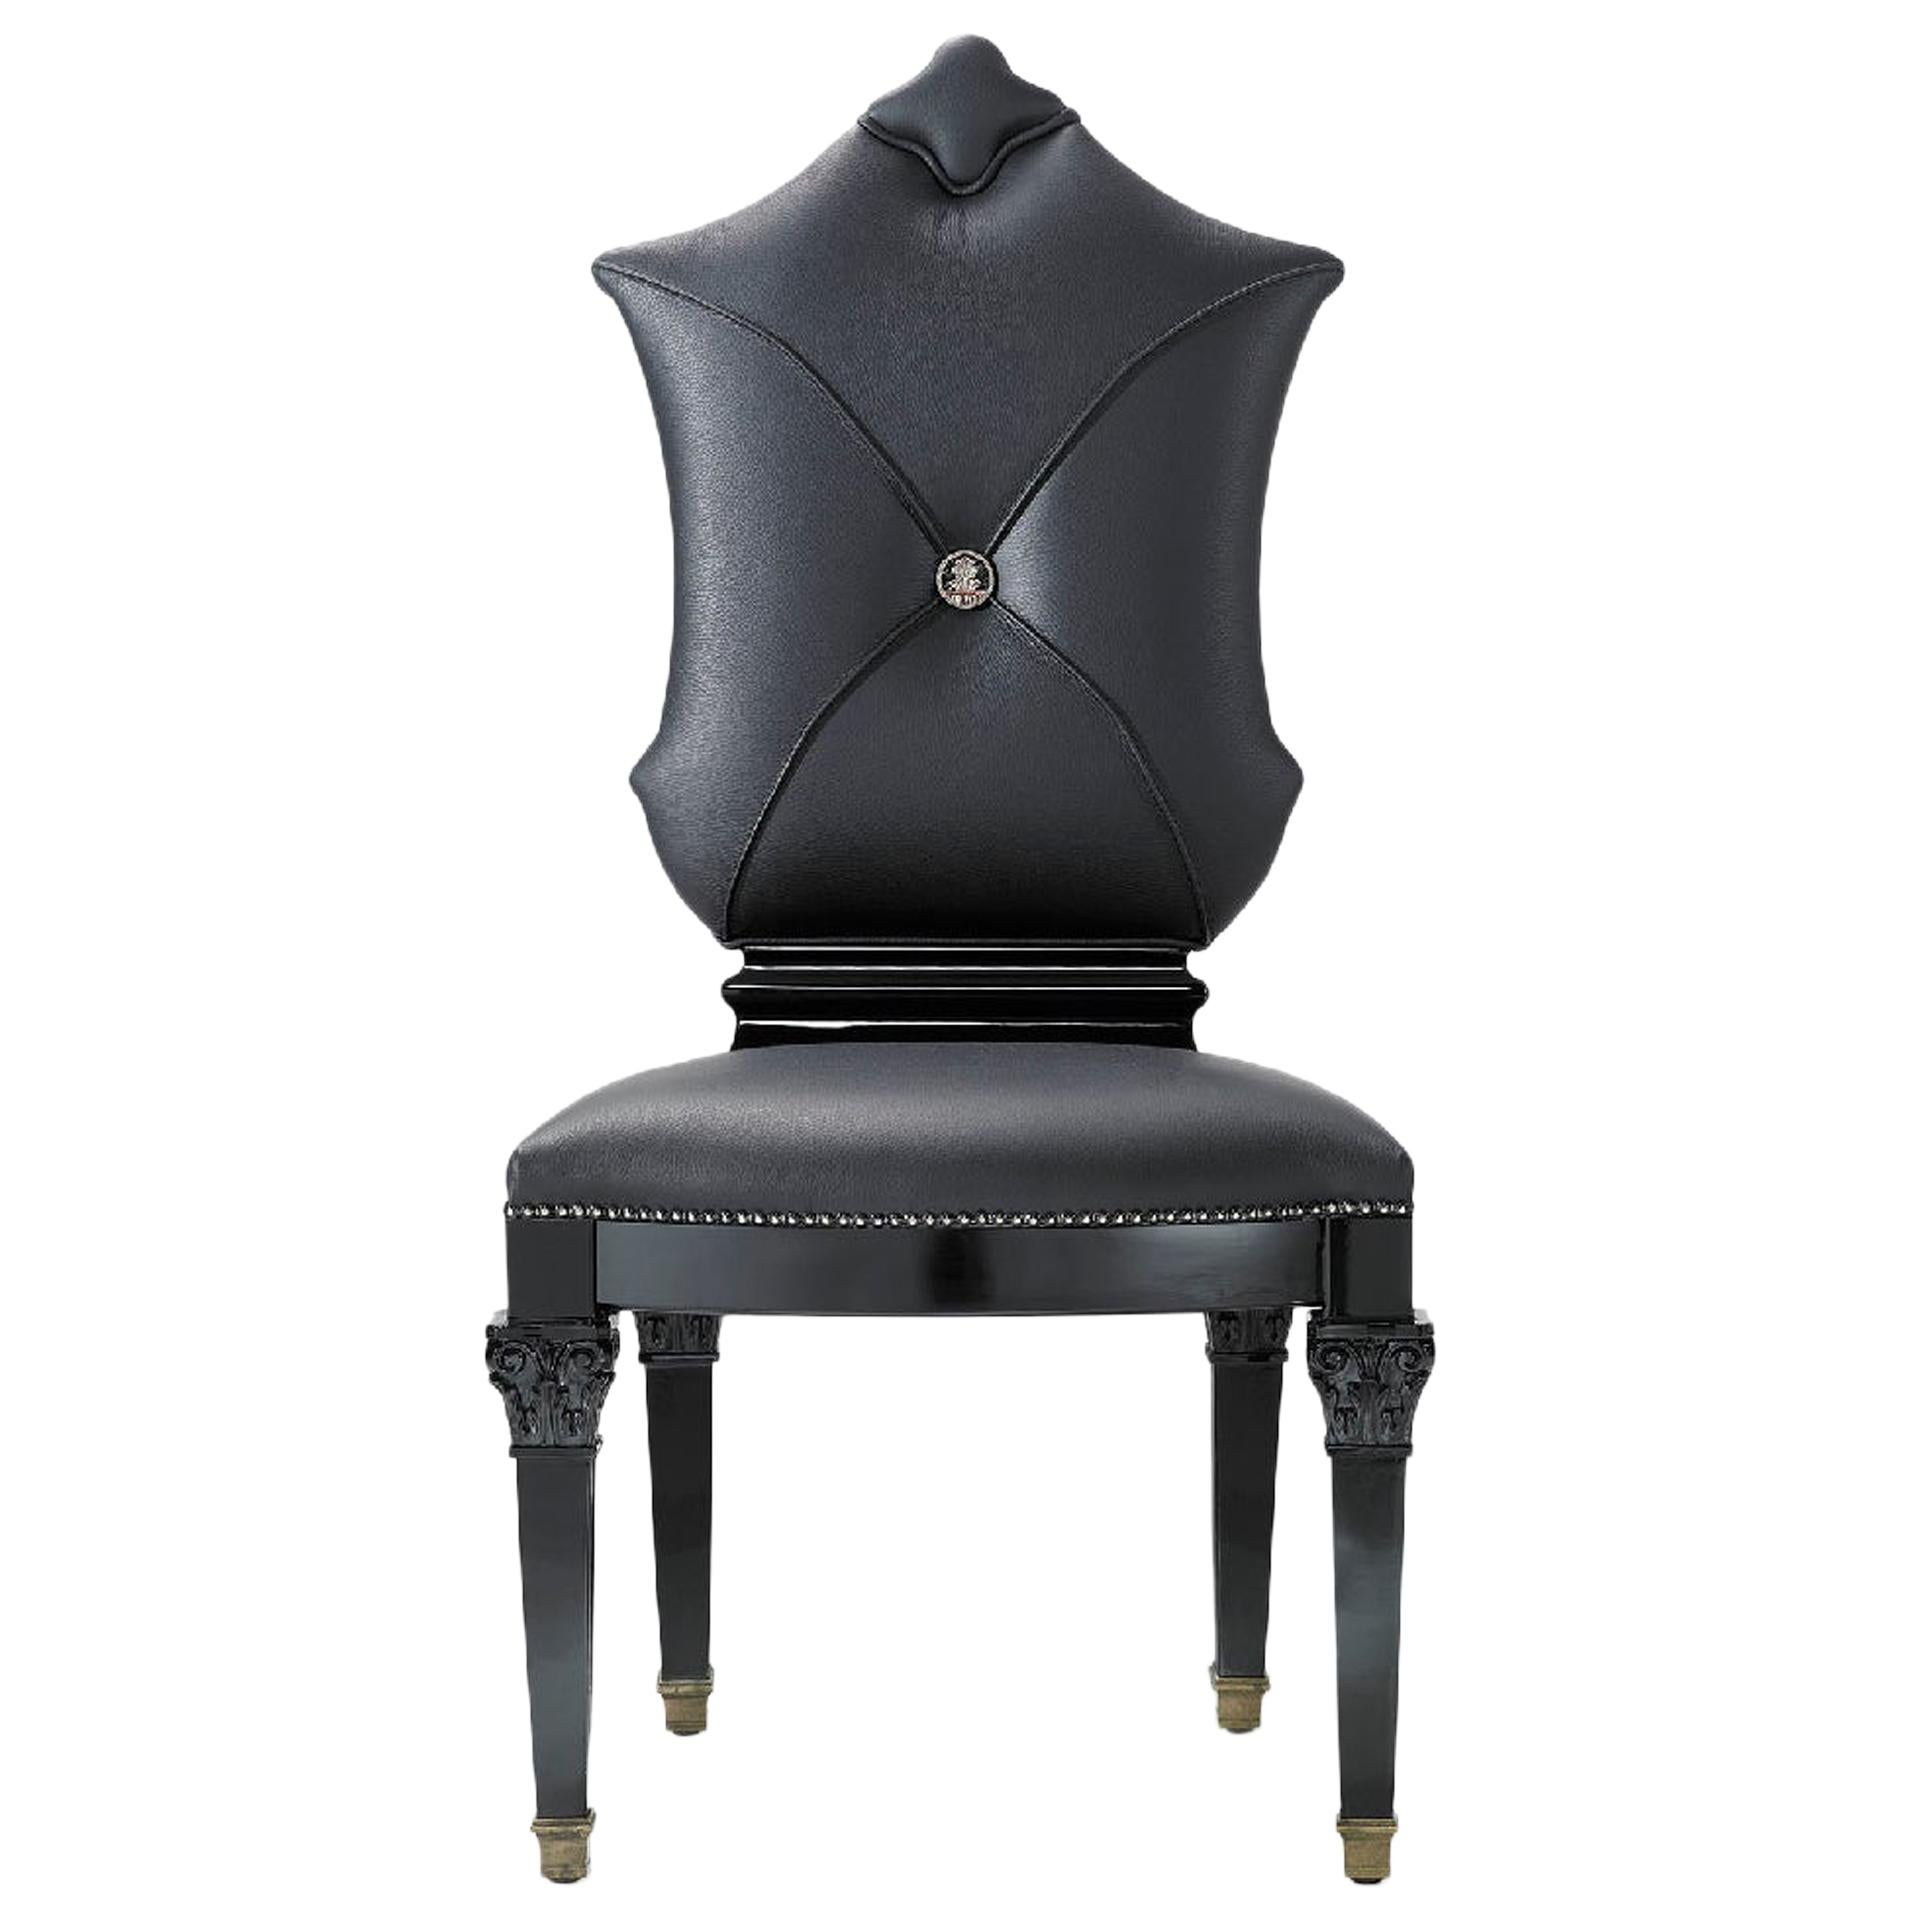 Chair Carved Solidwood Black Lacquer Finish Dakened Feet Black Caps Leather For Sale